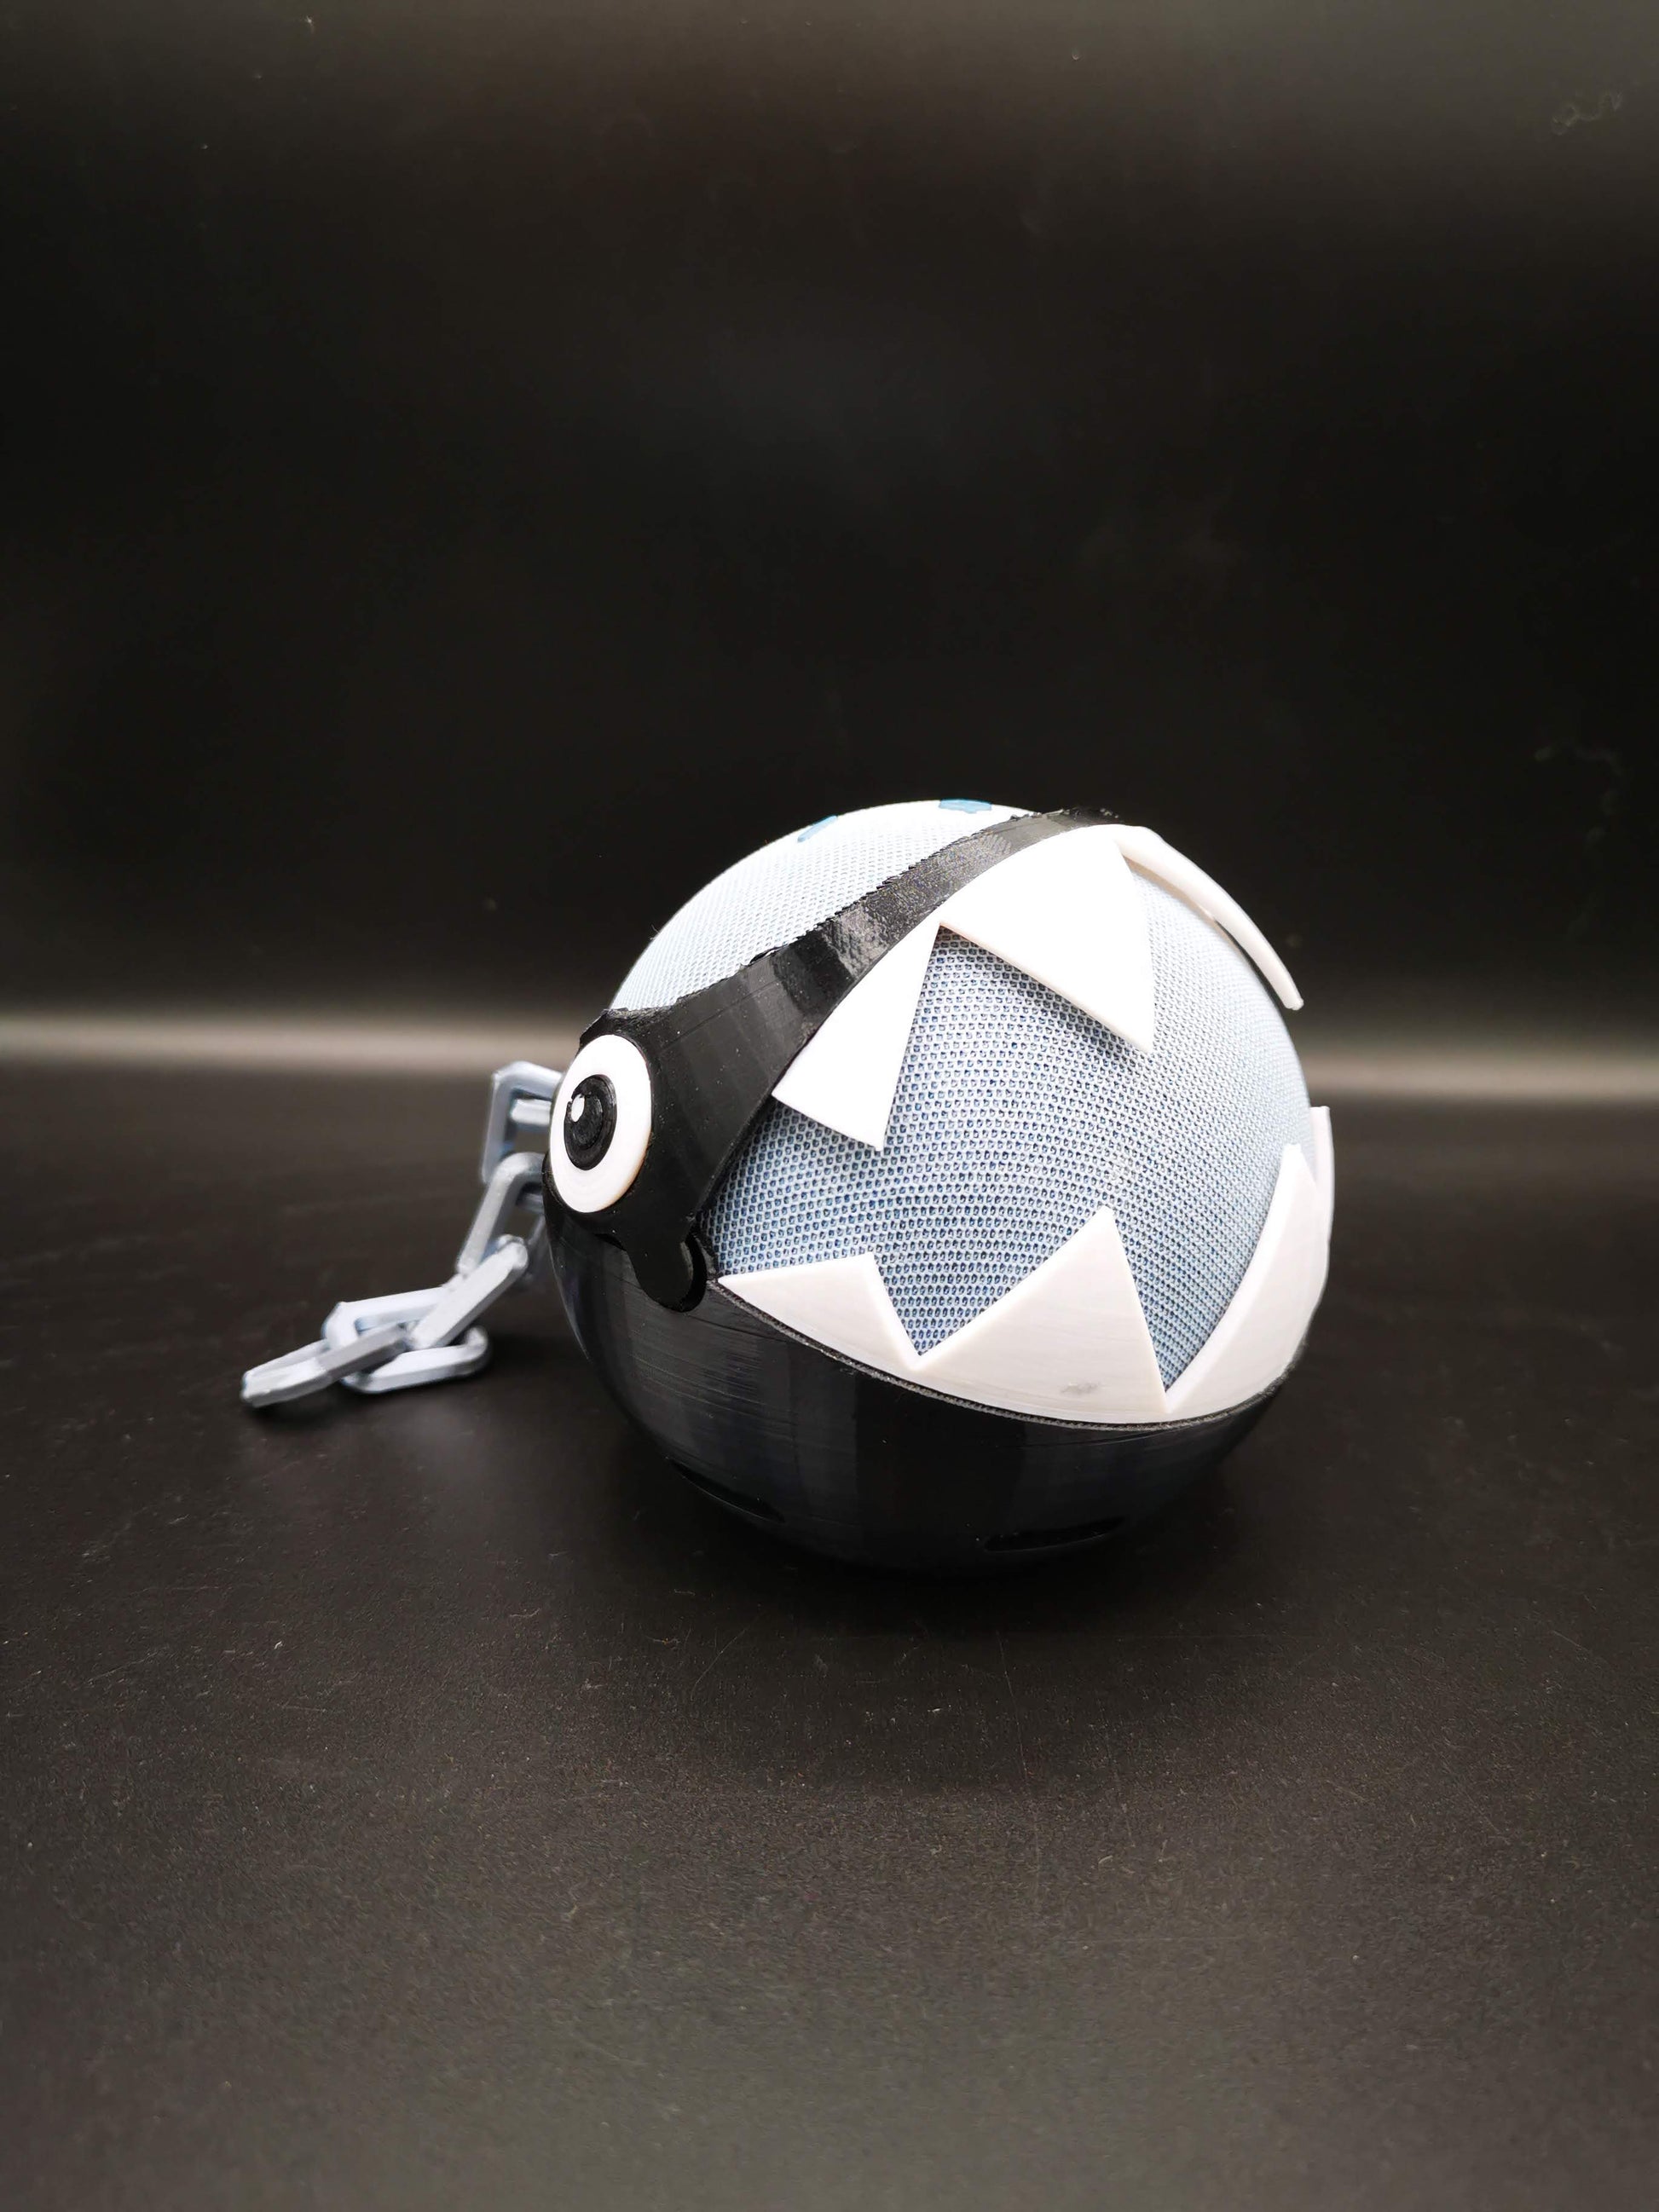 Chain Chomp Alexa Echo holder from a front side angle with mouth open